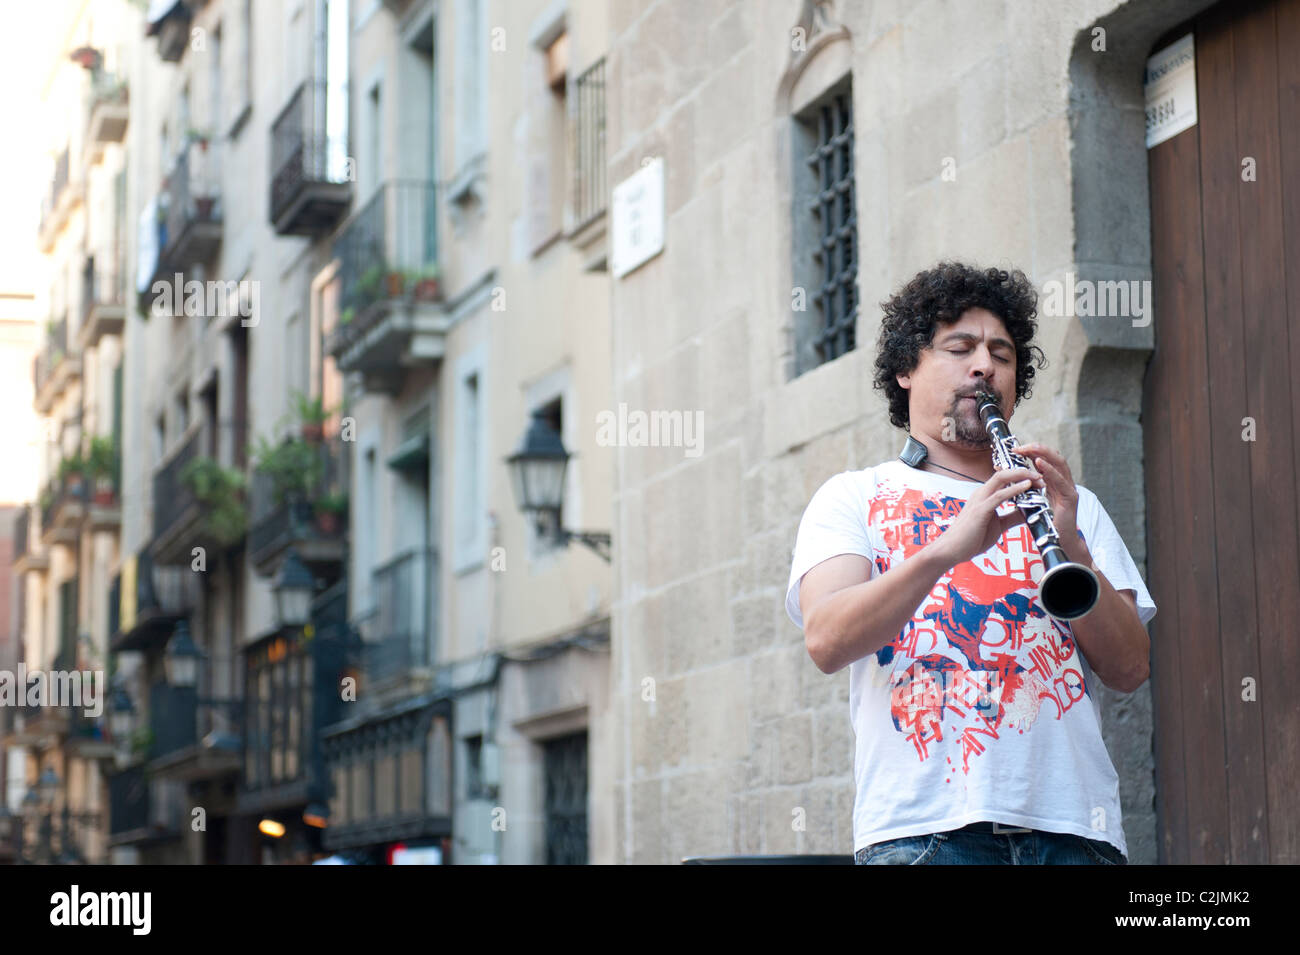 Clarinet player performing in the Gothic part of Barcelona, Spain Stock Photo